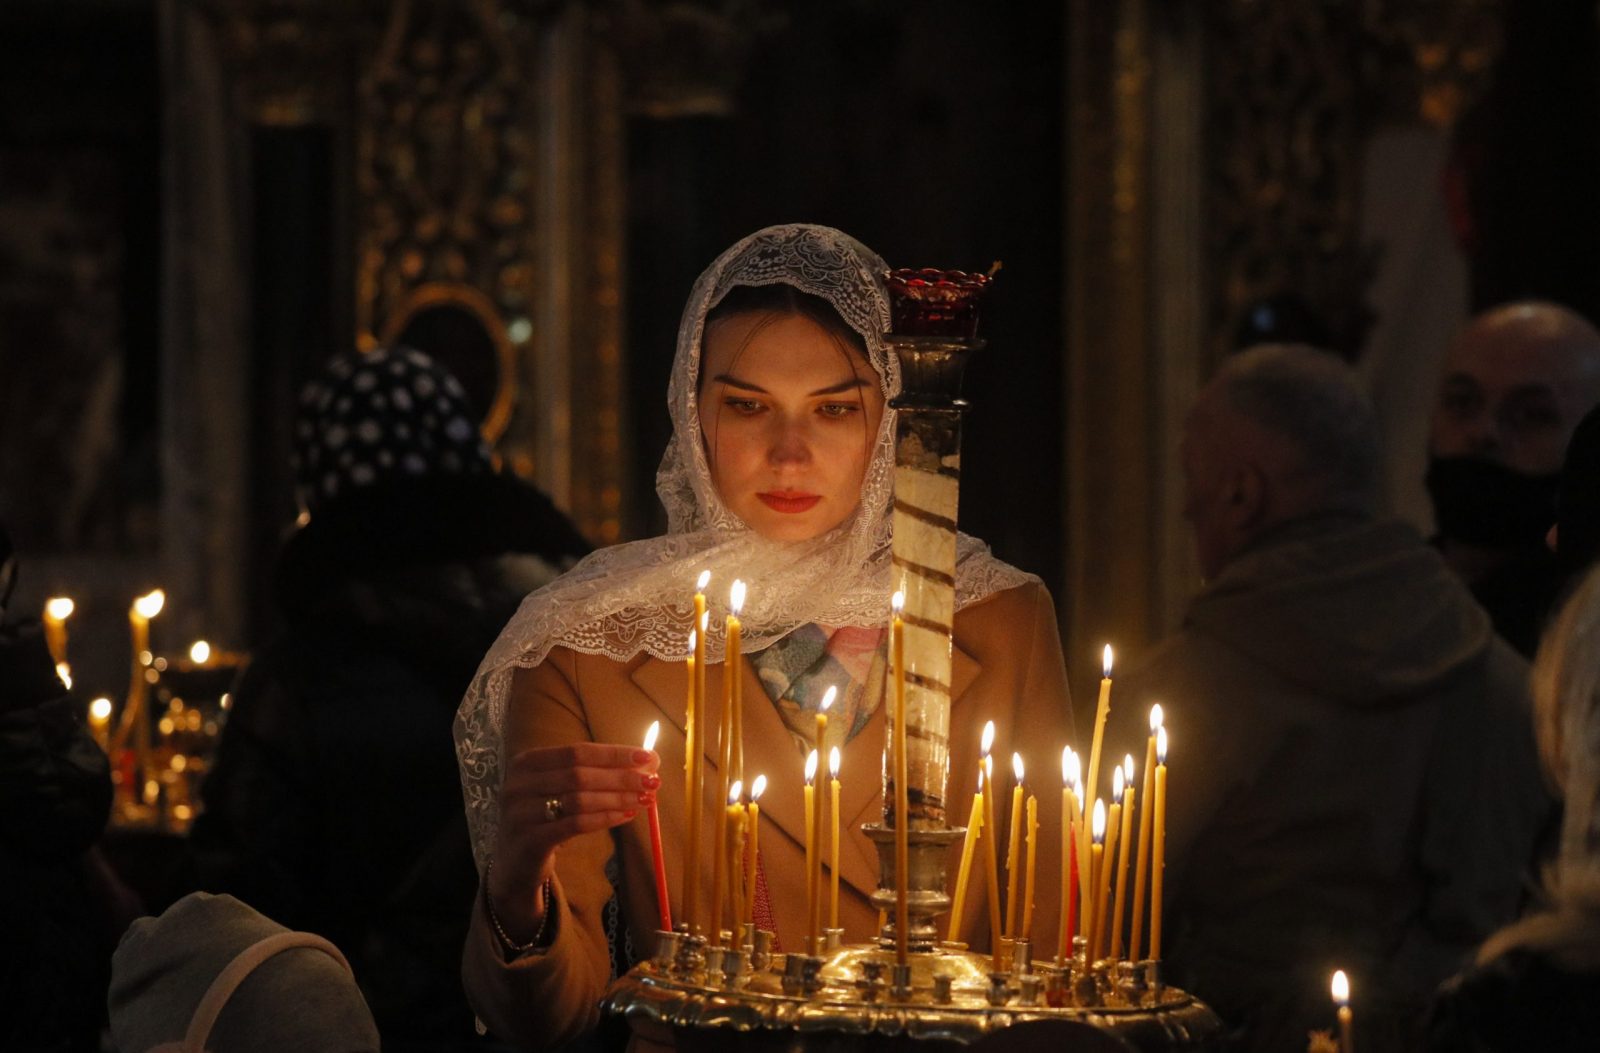 epa10575542 A Ukrainian woman lights a candle as faithful attend an Orthodox Easter mass at St. Volodymyr Cathedral in Kyiv (Kiev), Ukraine, 16 April 2023. Eastern Orthodox Christians worldwide celebrate Easter on 16 April 2023, according to the Julian calendar. Christians celebrate Easter Sunday to mark the resurrection of Jesus Christ from the dead and the foundation of the Christian faith.  EPA/SERGEY DOLZHENKO